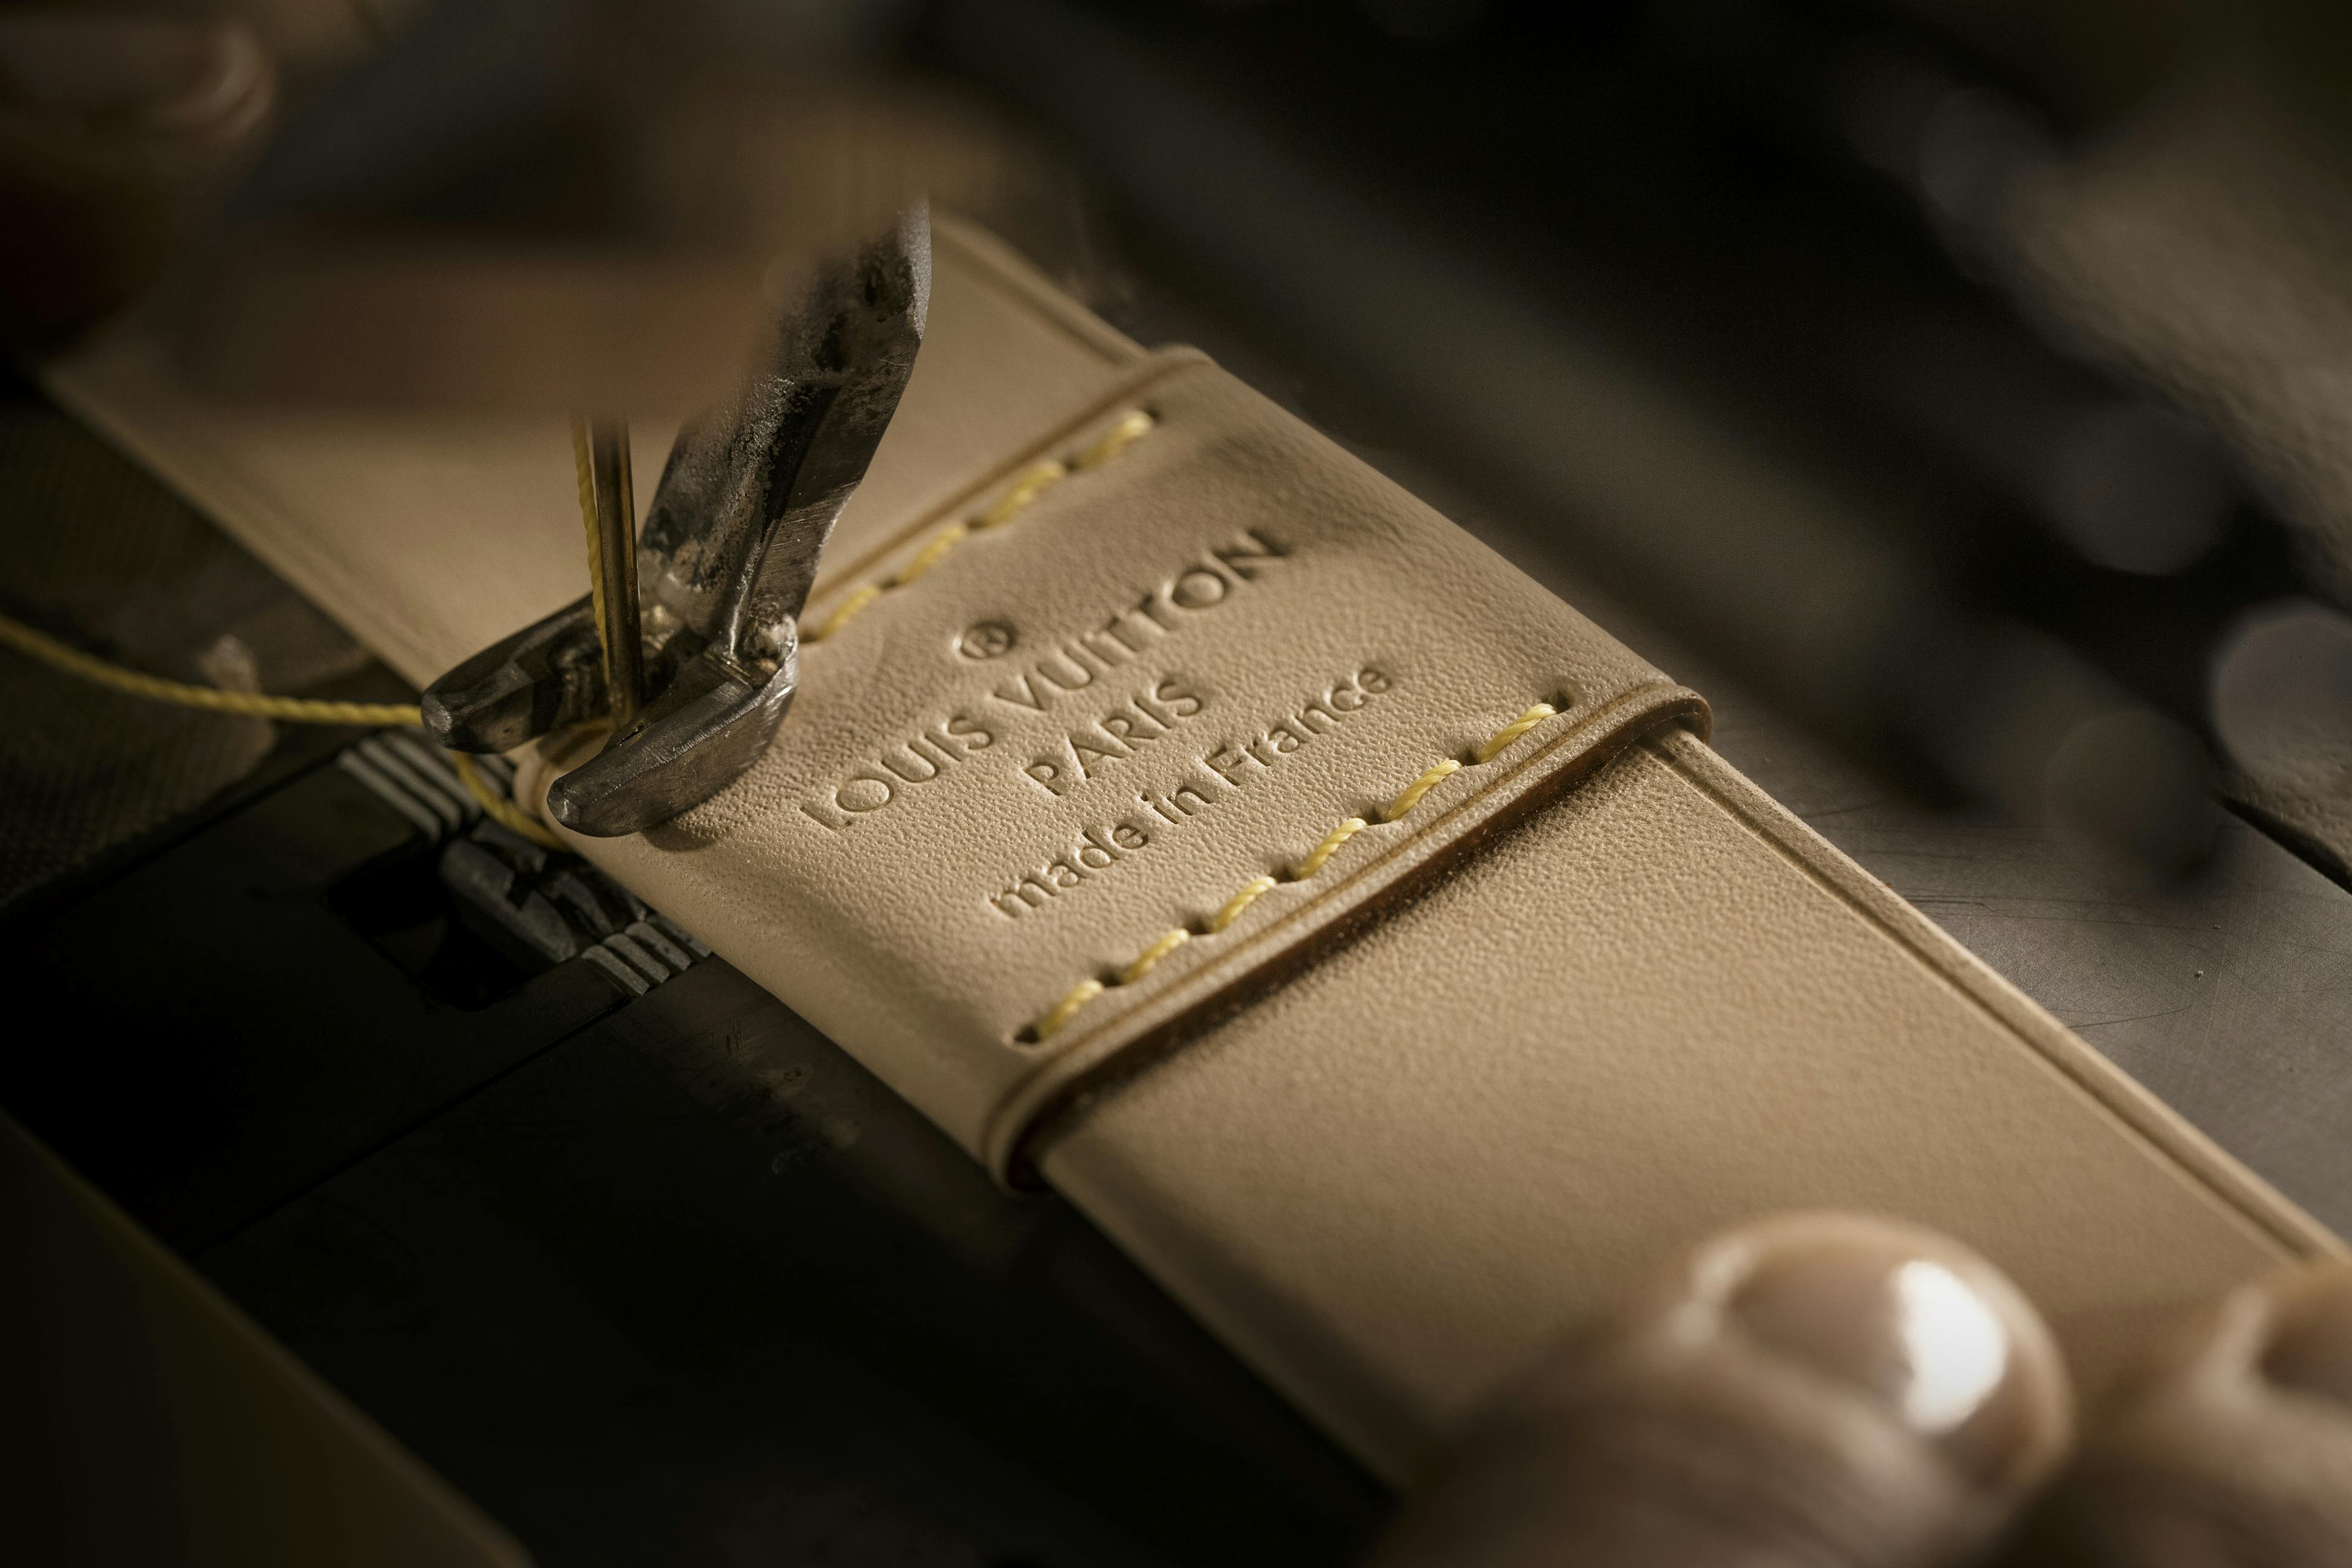 Louis Vuitton workshops in Sainte-Florence, 2014: sewing-machine stitching on the leather base of the Alma PM in Monogram canvas. © Louis Vuitton Malletier / Benjamin Decoin